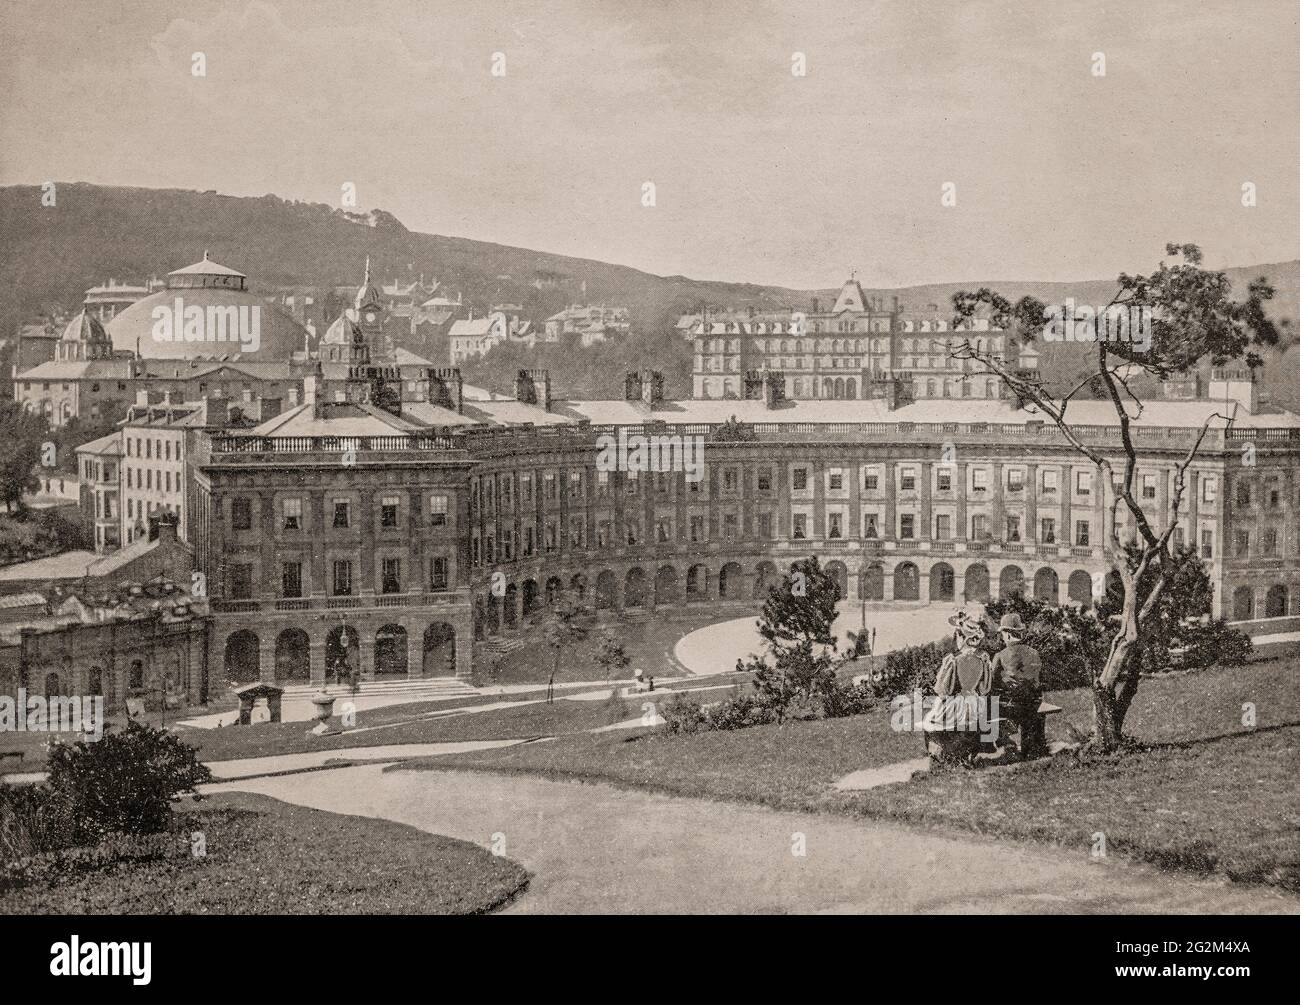 A late 19th century view of Buxton Crescent in the town of Buxton, Derbyshire, England from the Slopes, a steep landscaped hillside where warm spring water at a constant 27.5 °C (81.5 °F), has flowed for thousands of years from St Ann's Well. The crescent owing much to the Royal Crescent in Bath, was designed by the architect John Carr of York, and built for the 5th Duke of Devonshire between 1780 and 1789. Stock Photo